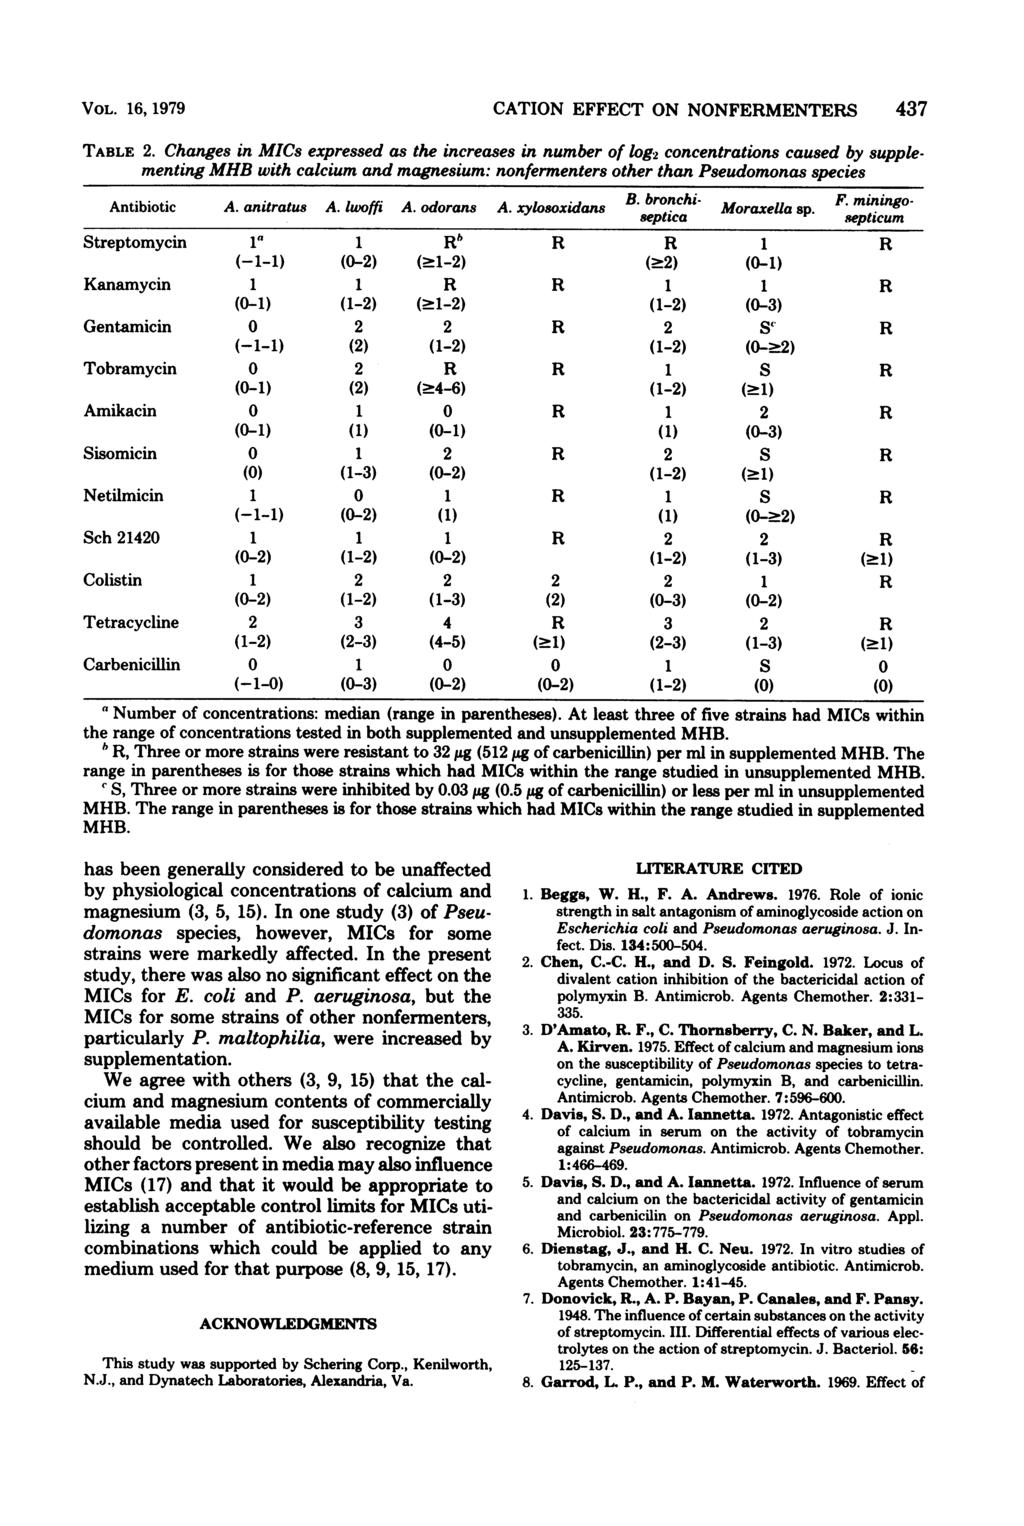 VOL. 16, 1979 CATION EFFECT ON NONFERMENTERS 437 TABLE 2.